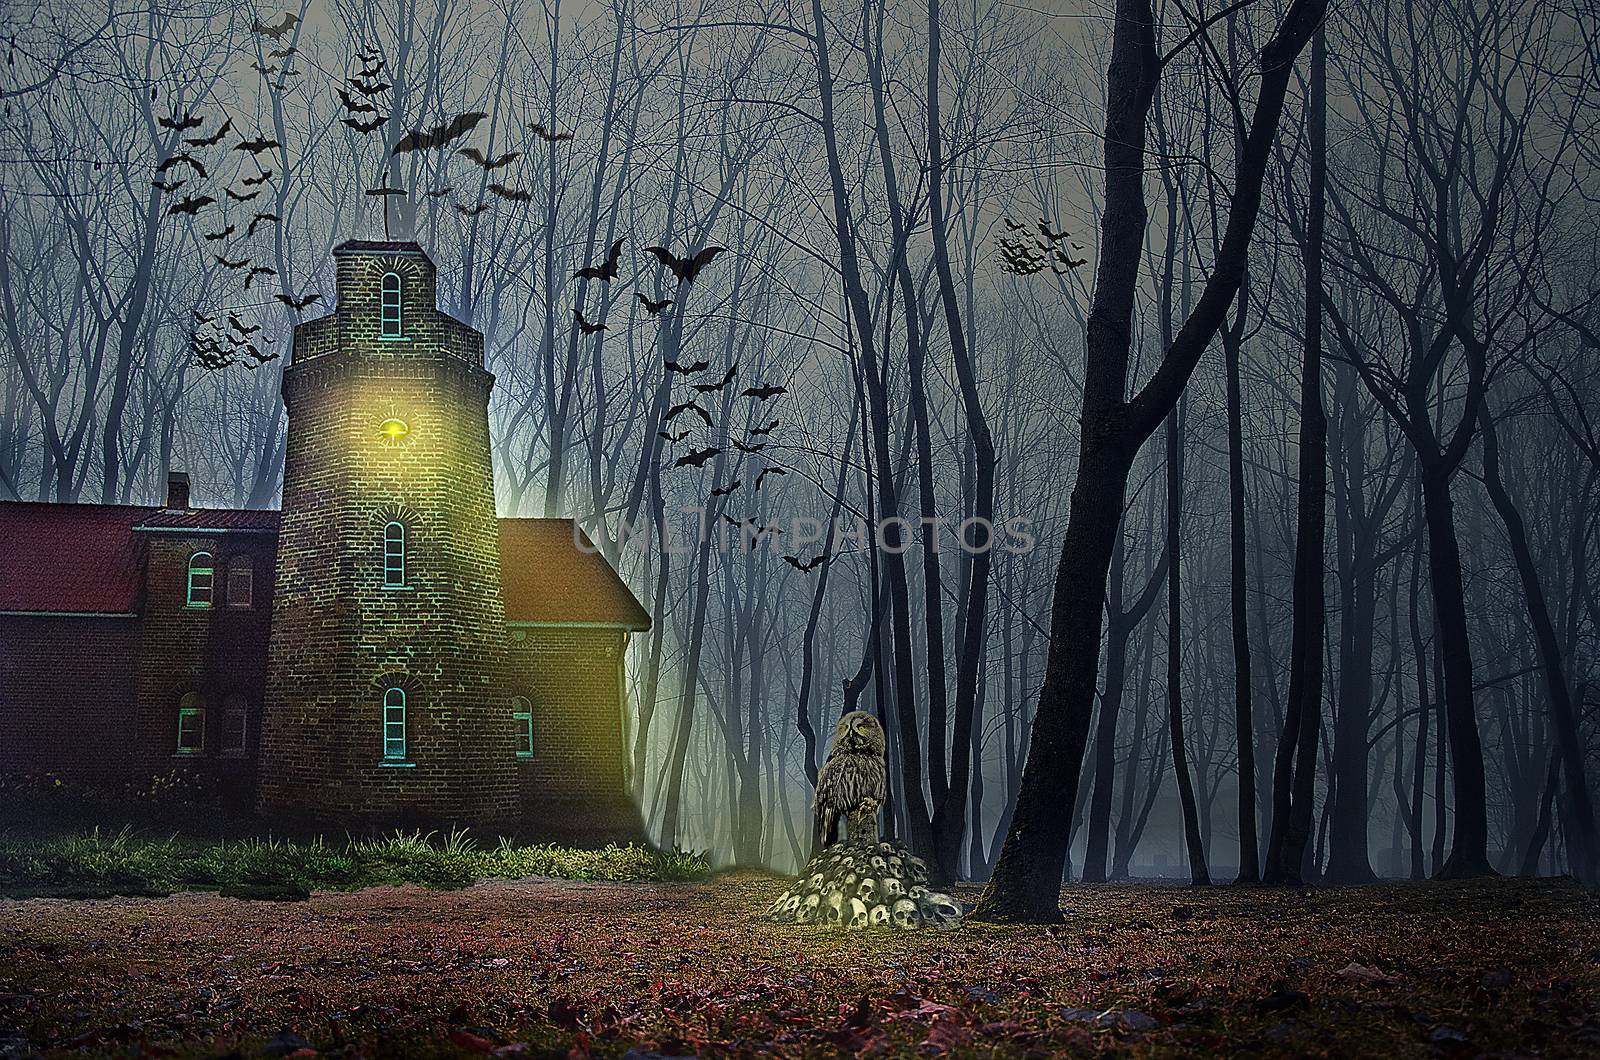 Misty evening in the forest. Halloween house with Moon and bats by KajaNi